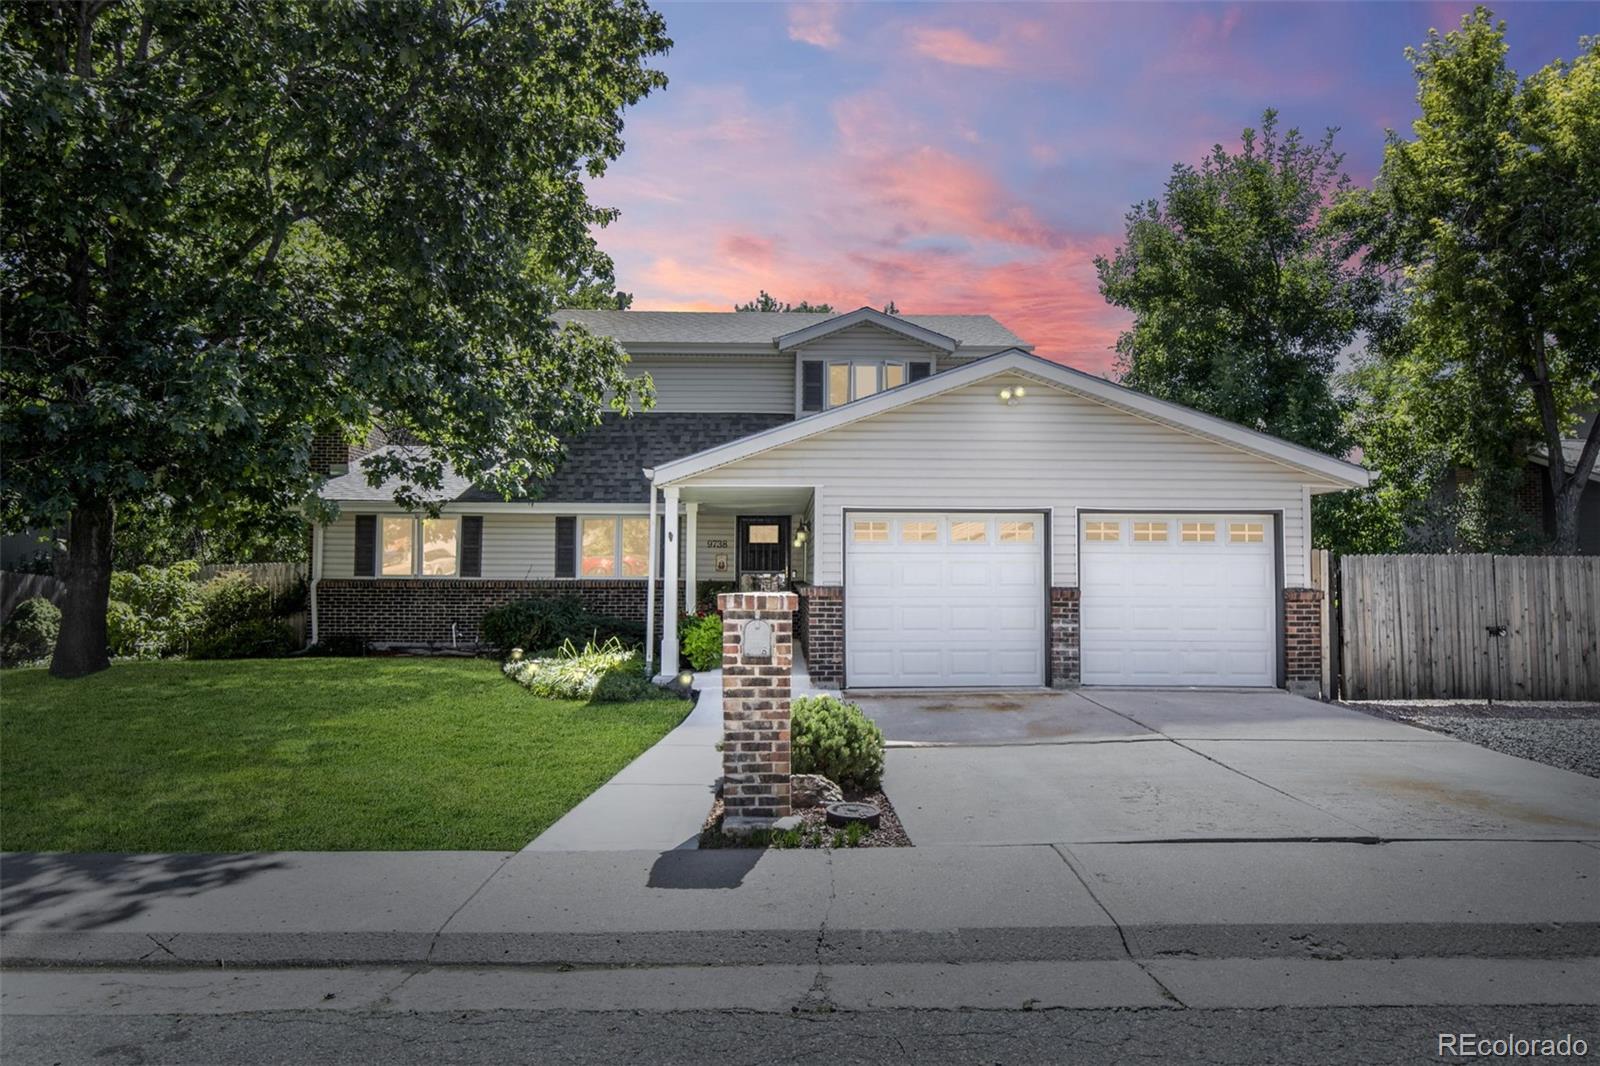 9738 W 74th Place, arvada MLS: 6038000 Beds: 5 Baths: 3 Price: $650,000